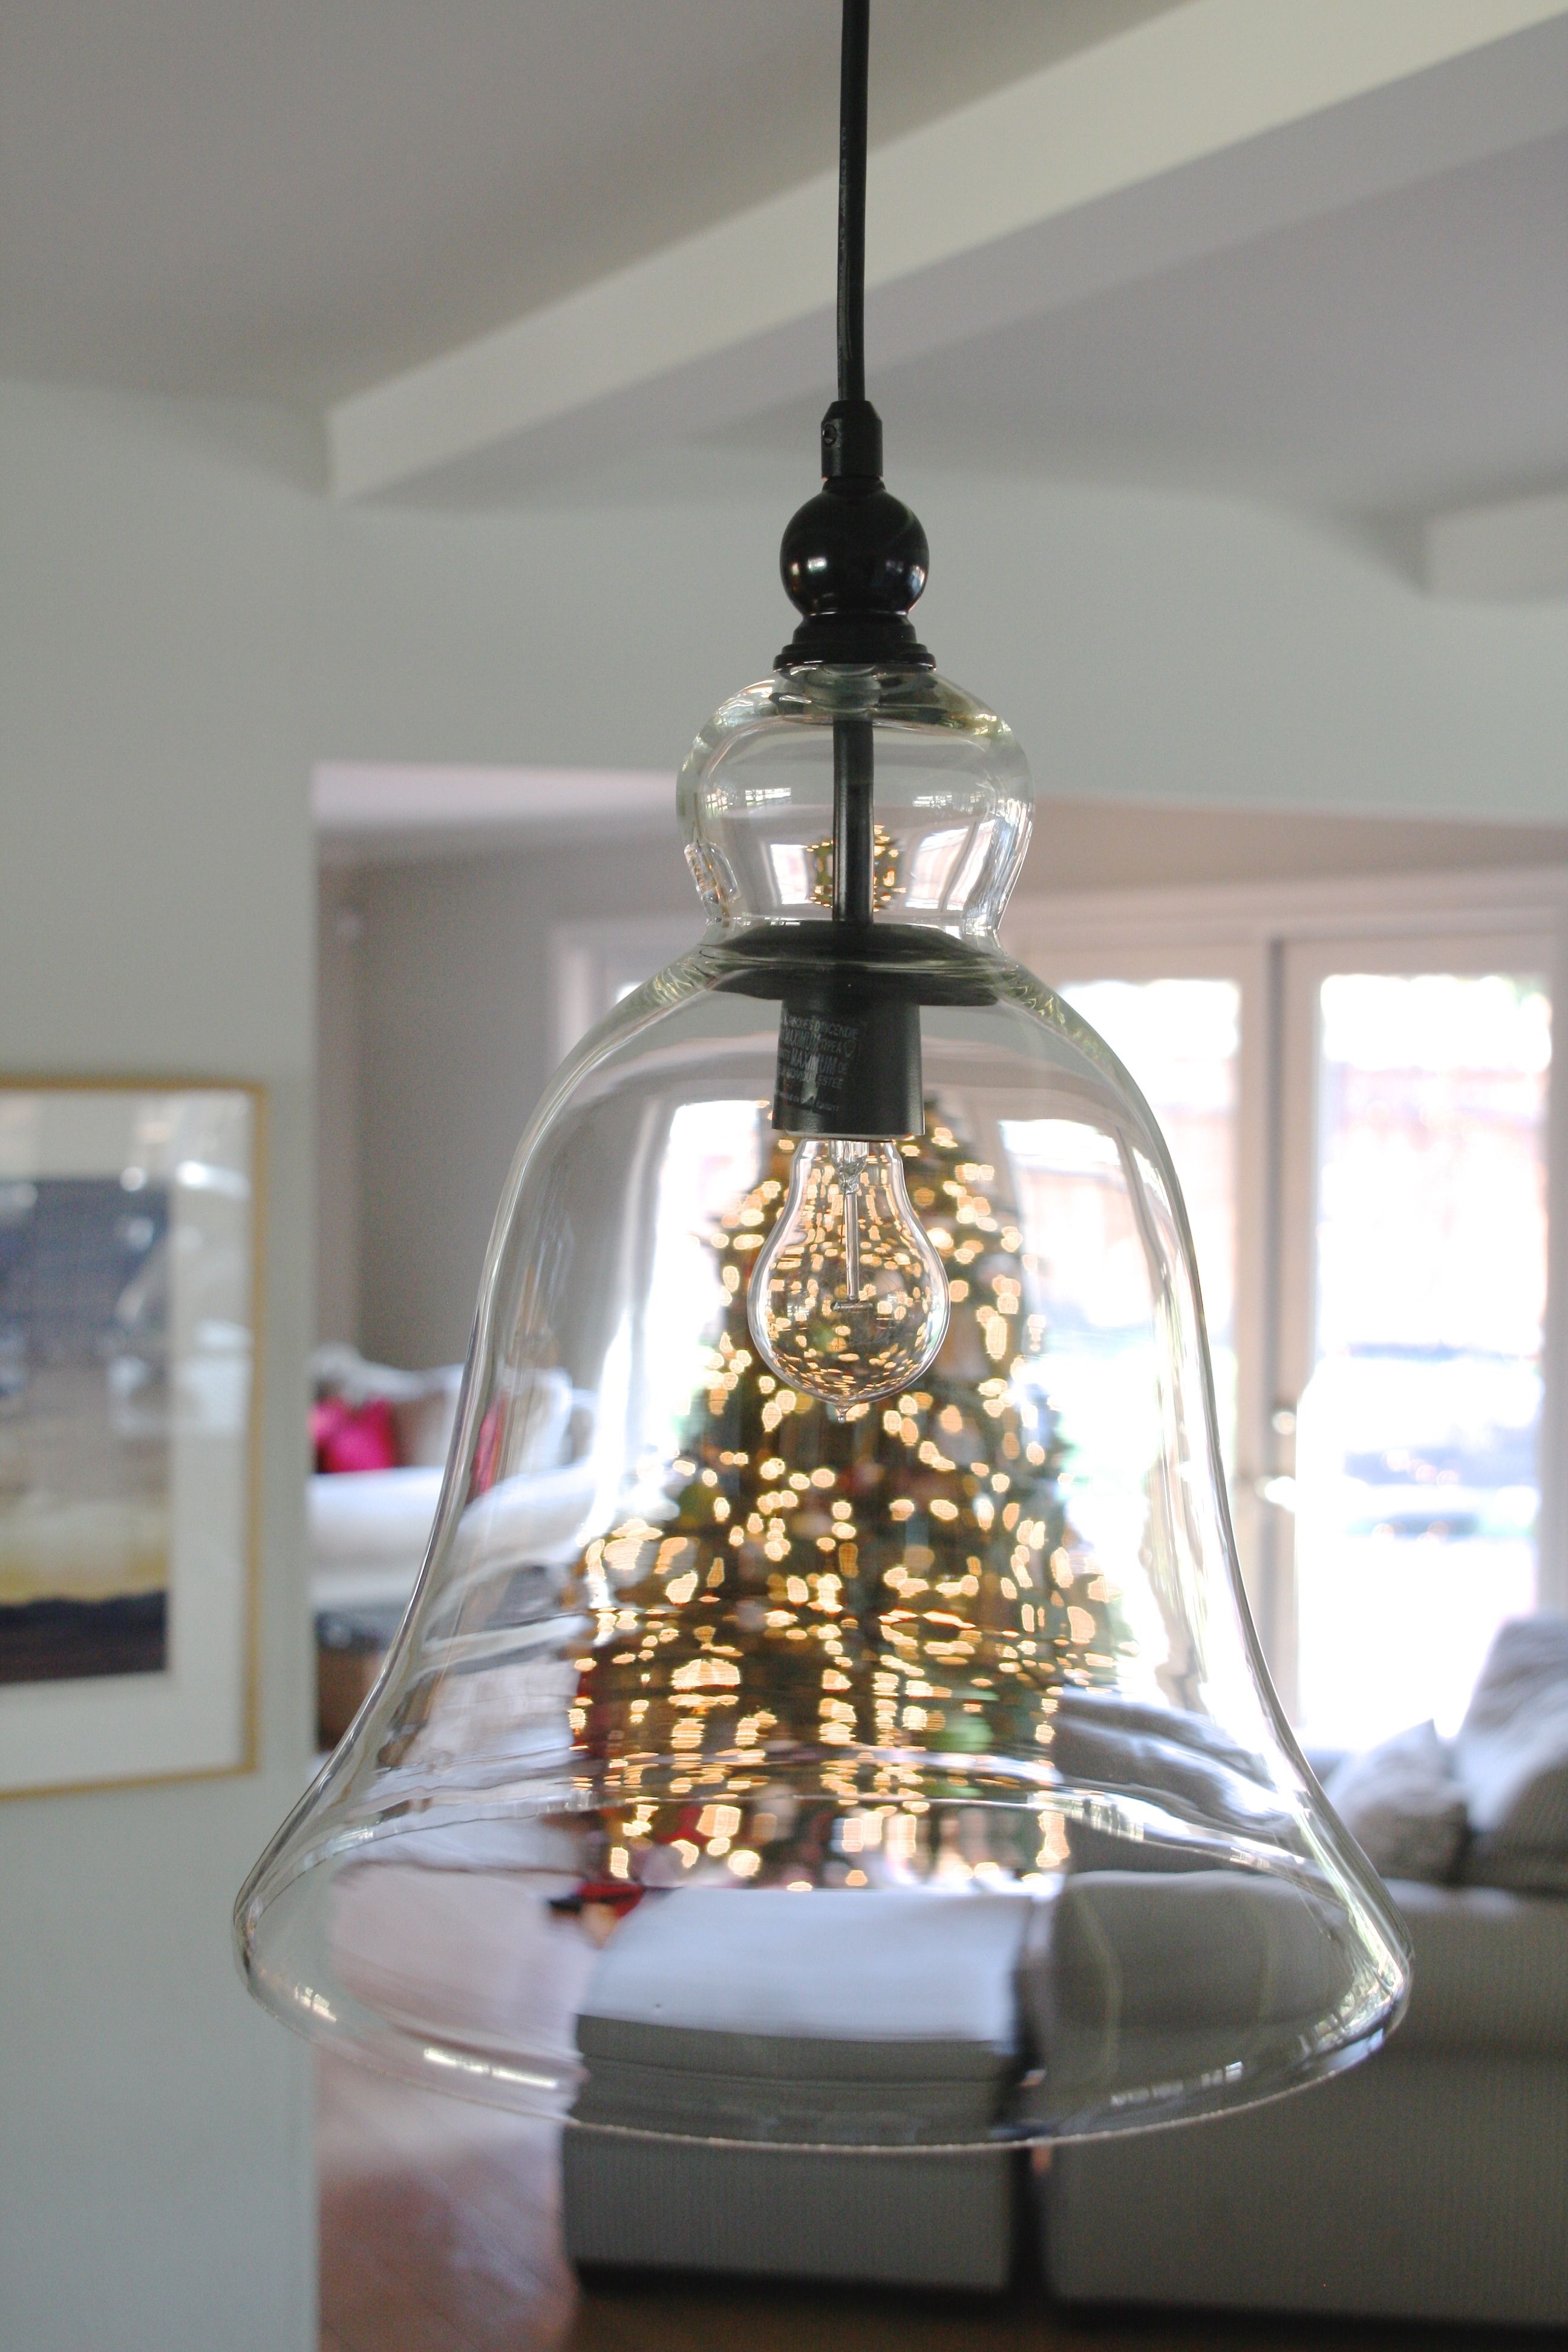 How To Clean Pottery Barn Rustic Pendant Lights – Simply Organized With Regard To Outdoor Lanterns At Pottery Barn (View 20 of 20)